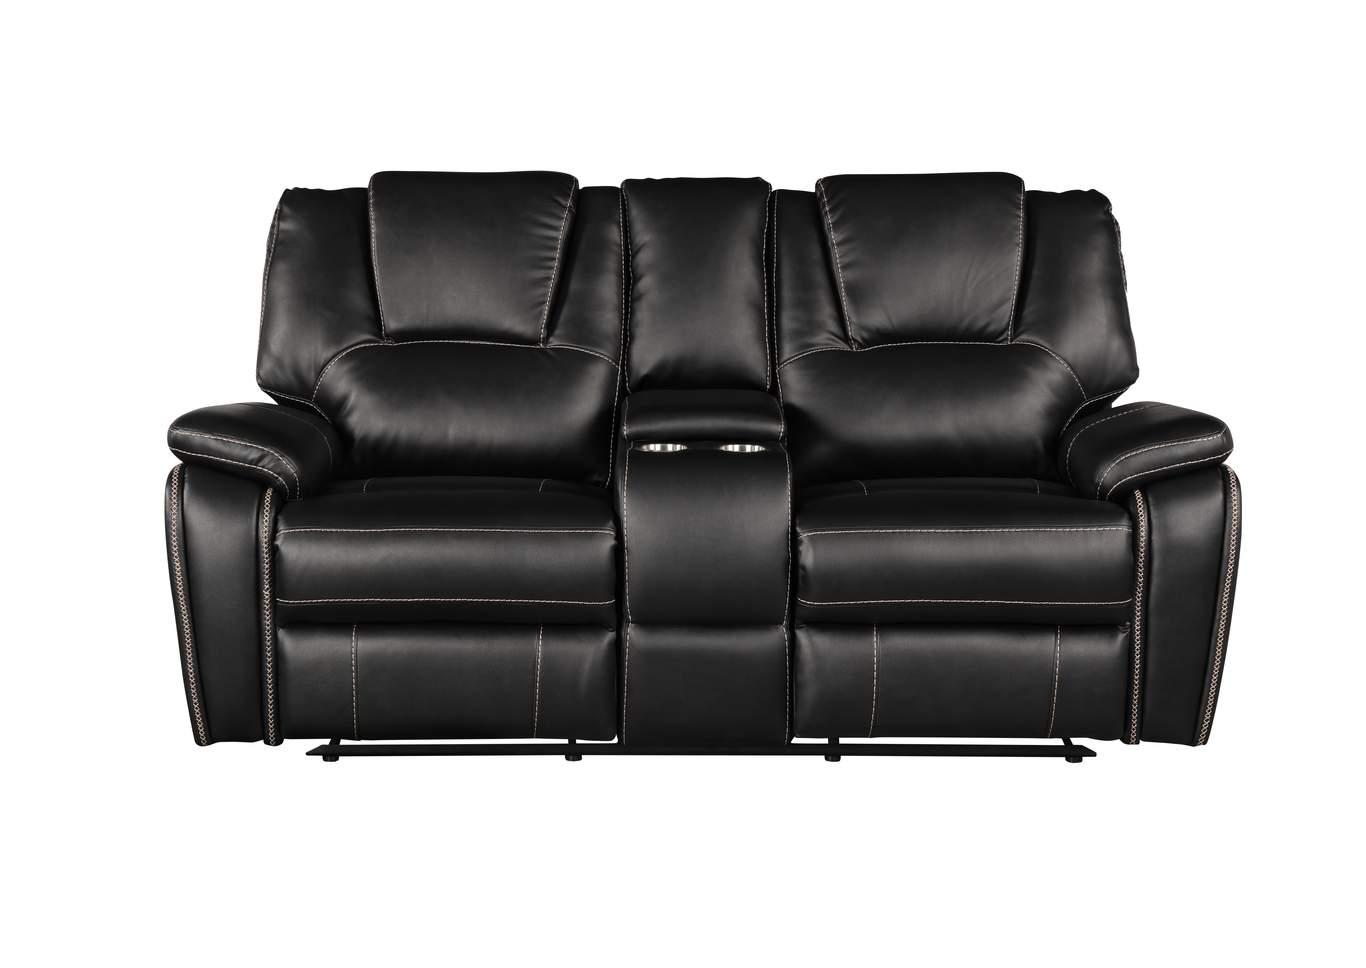 Contemporary, Modern Recliner Loveseat HONG KONG GHF-733569317011 in Black Eco-Leather